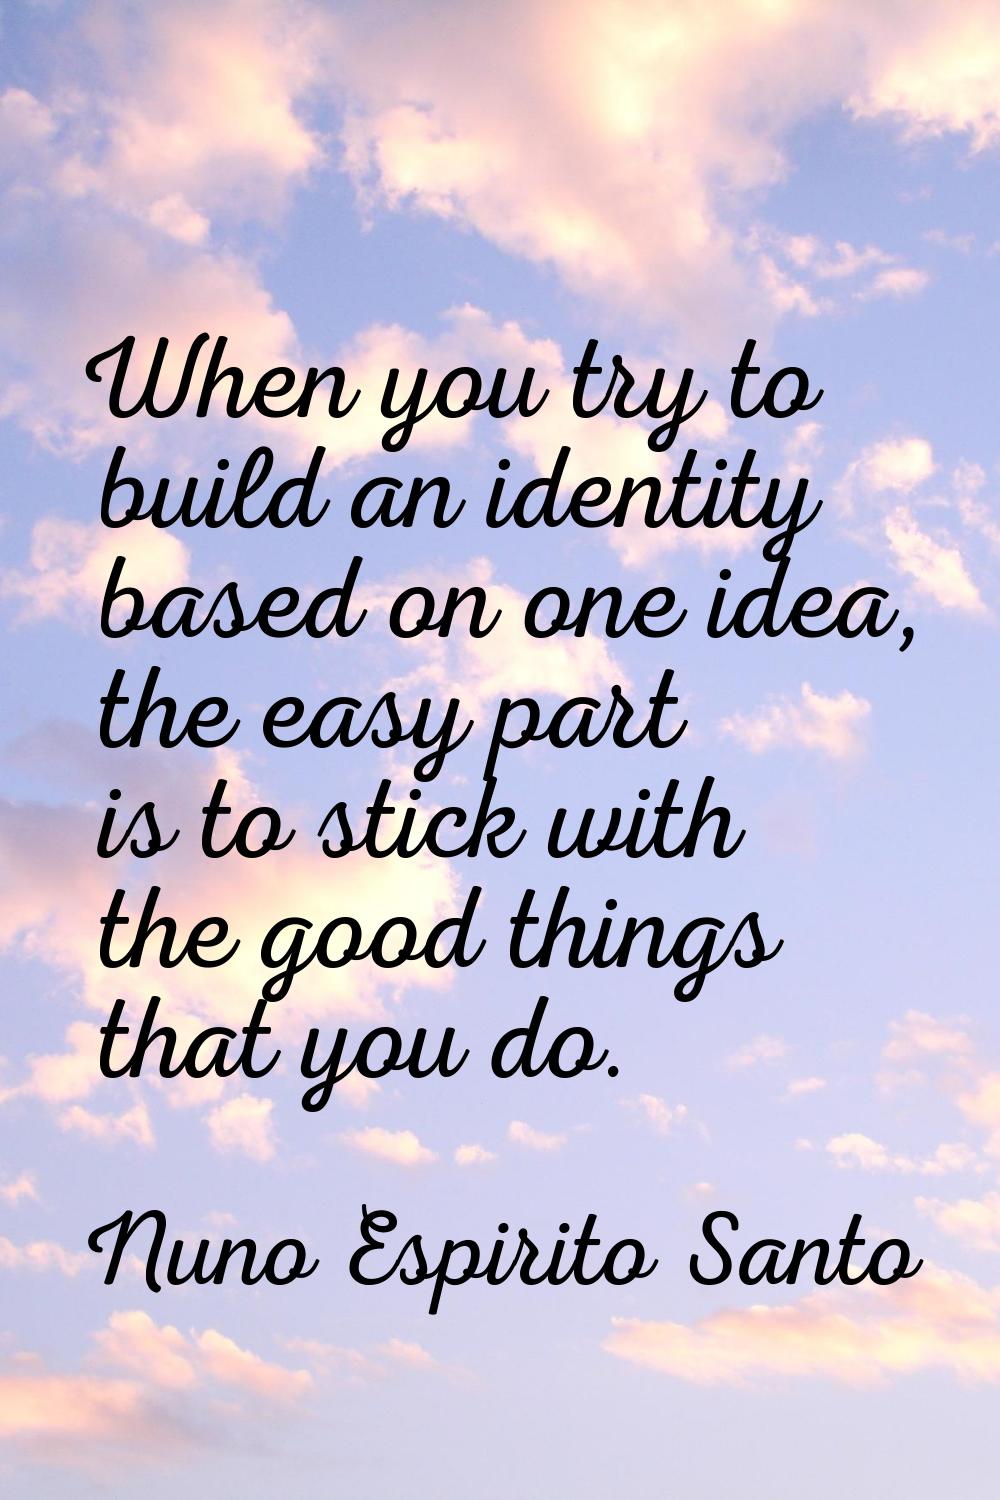 When you try to build an identity based on one idea, the easy part is to stick with the good things